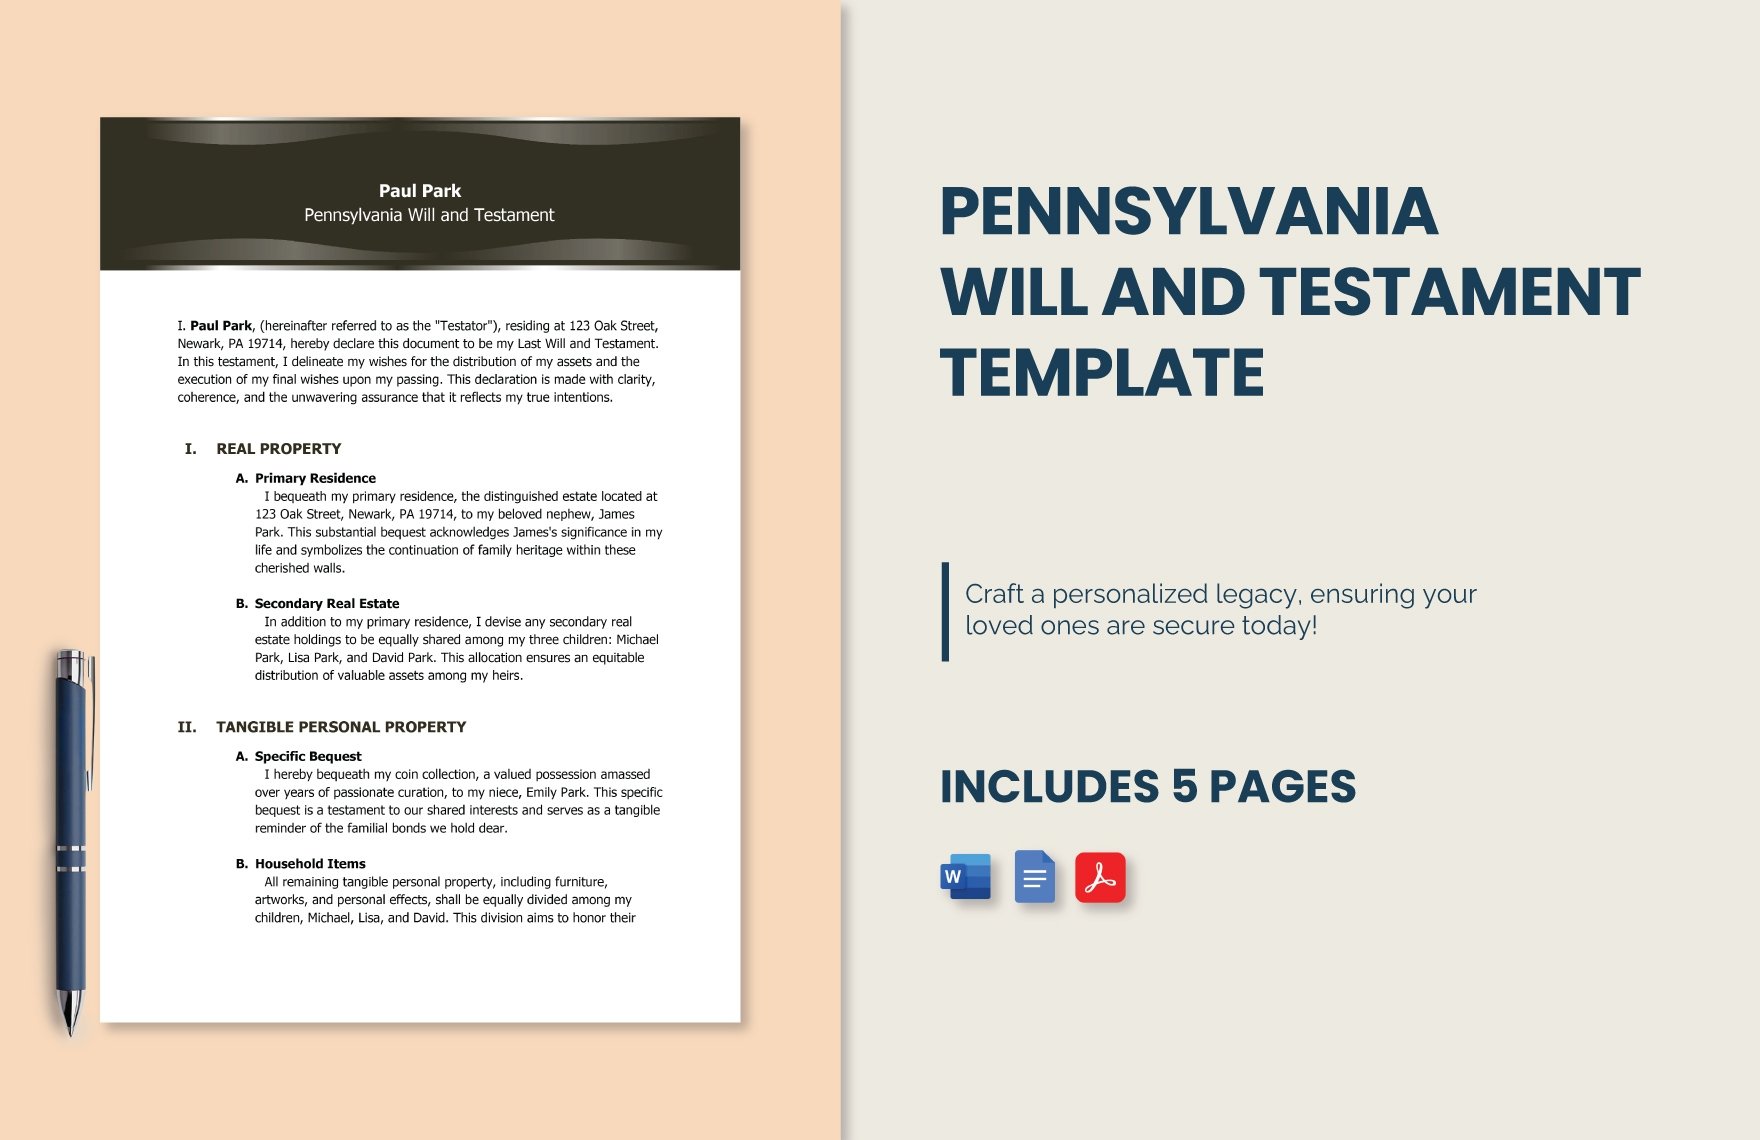 Pennsylvania Will and Testament Template